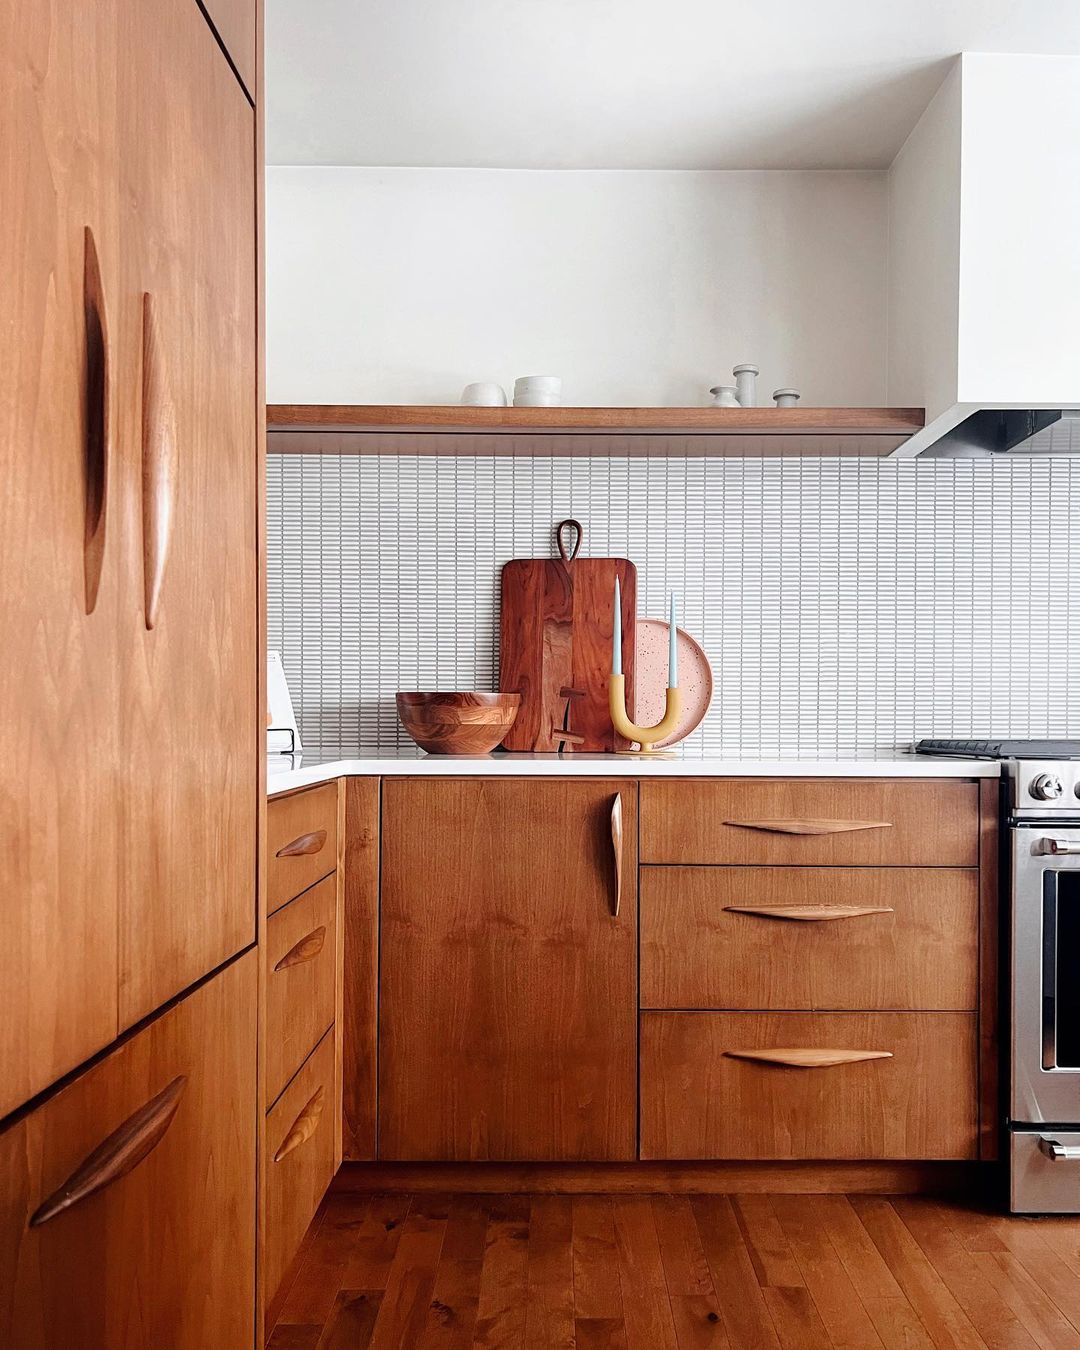 Vintage-Inspired Charm with Warm Wood Cabinets"